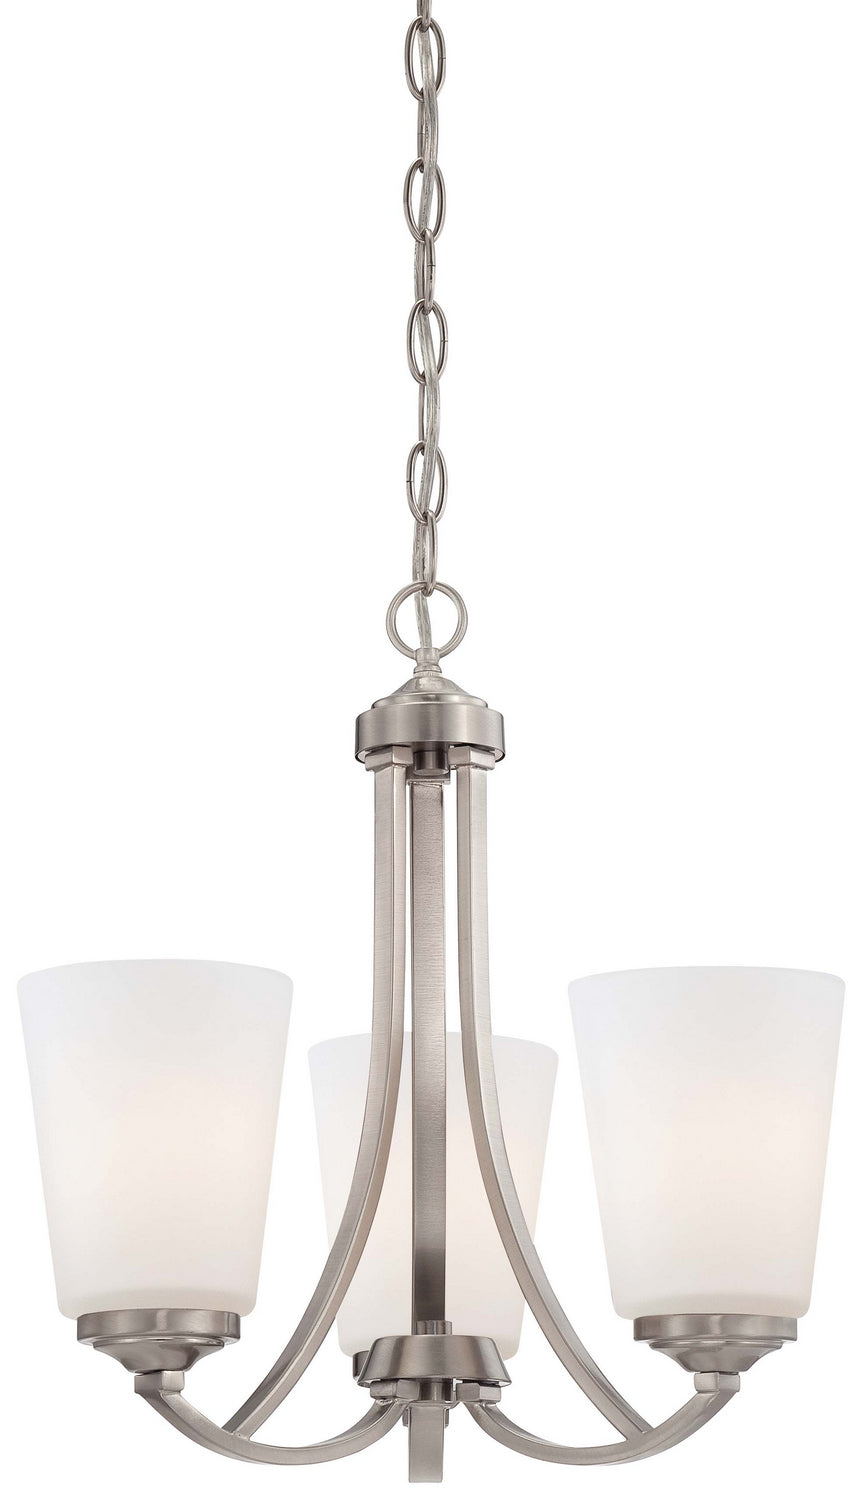 Overland Park 3-Light Mini-Chandelier in Brushed Nickel & Etched Marble Glass